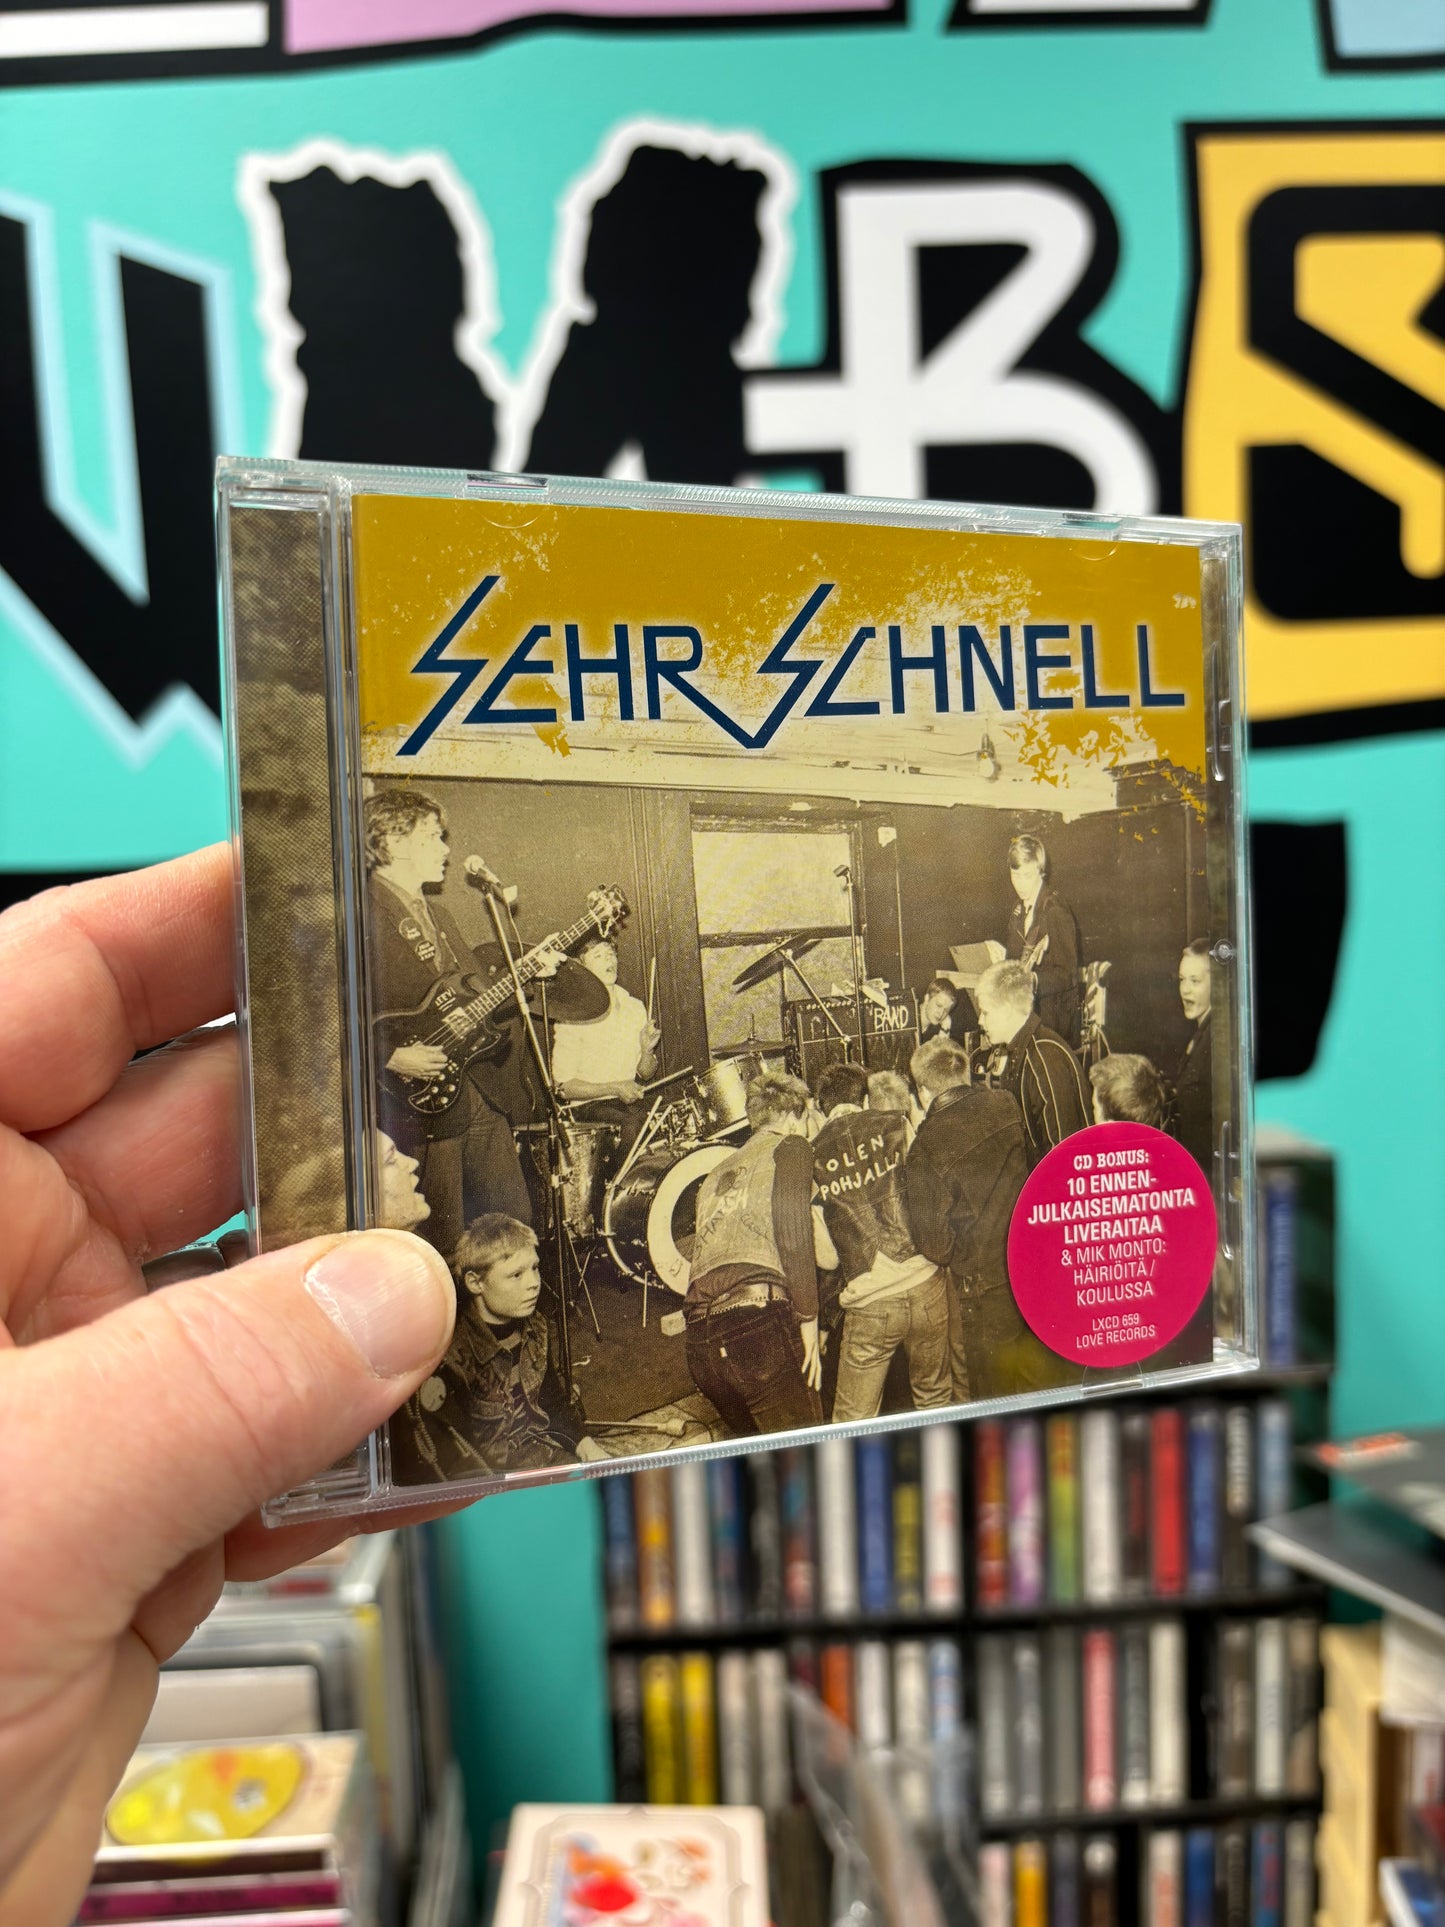 Sehr Schnell: Sehr Schnell, CD, remastered, Only pressing, Love Records, Finland 2009